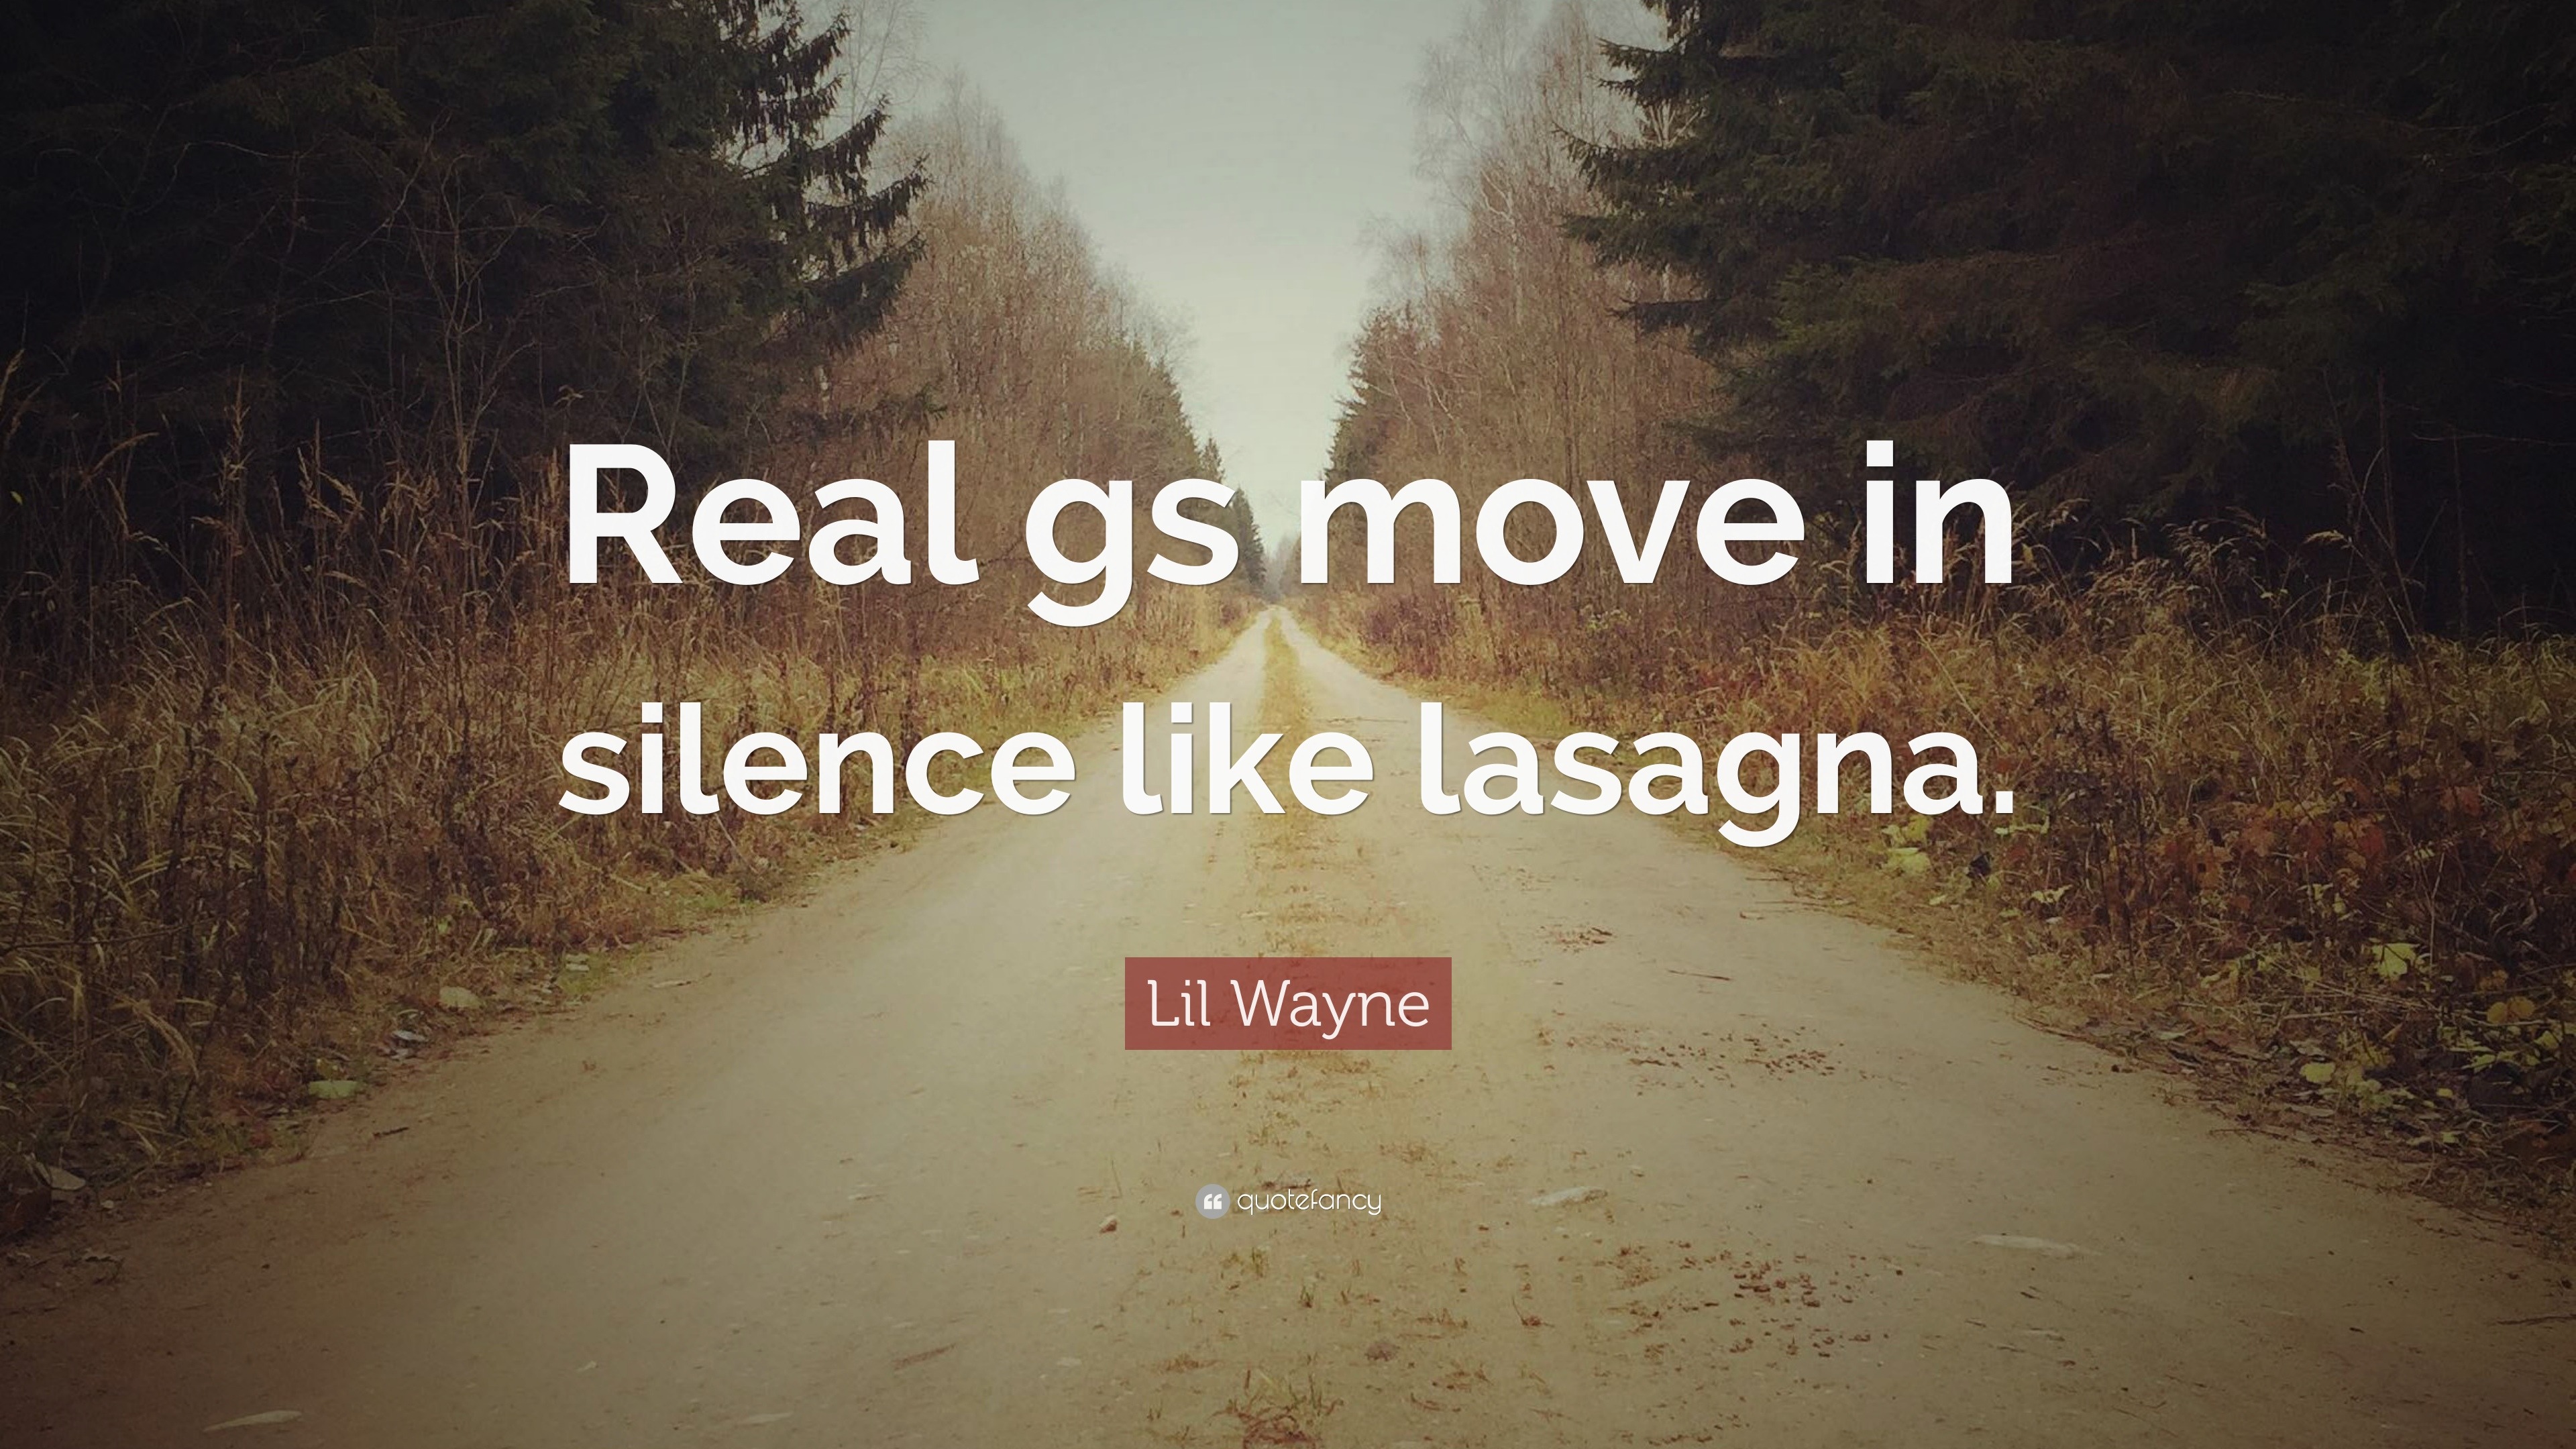 real gs move in silence like lasagna